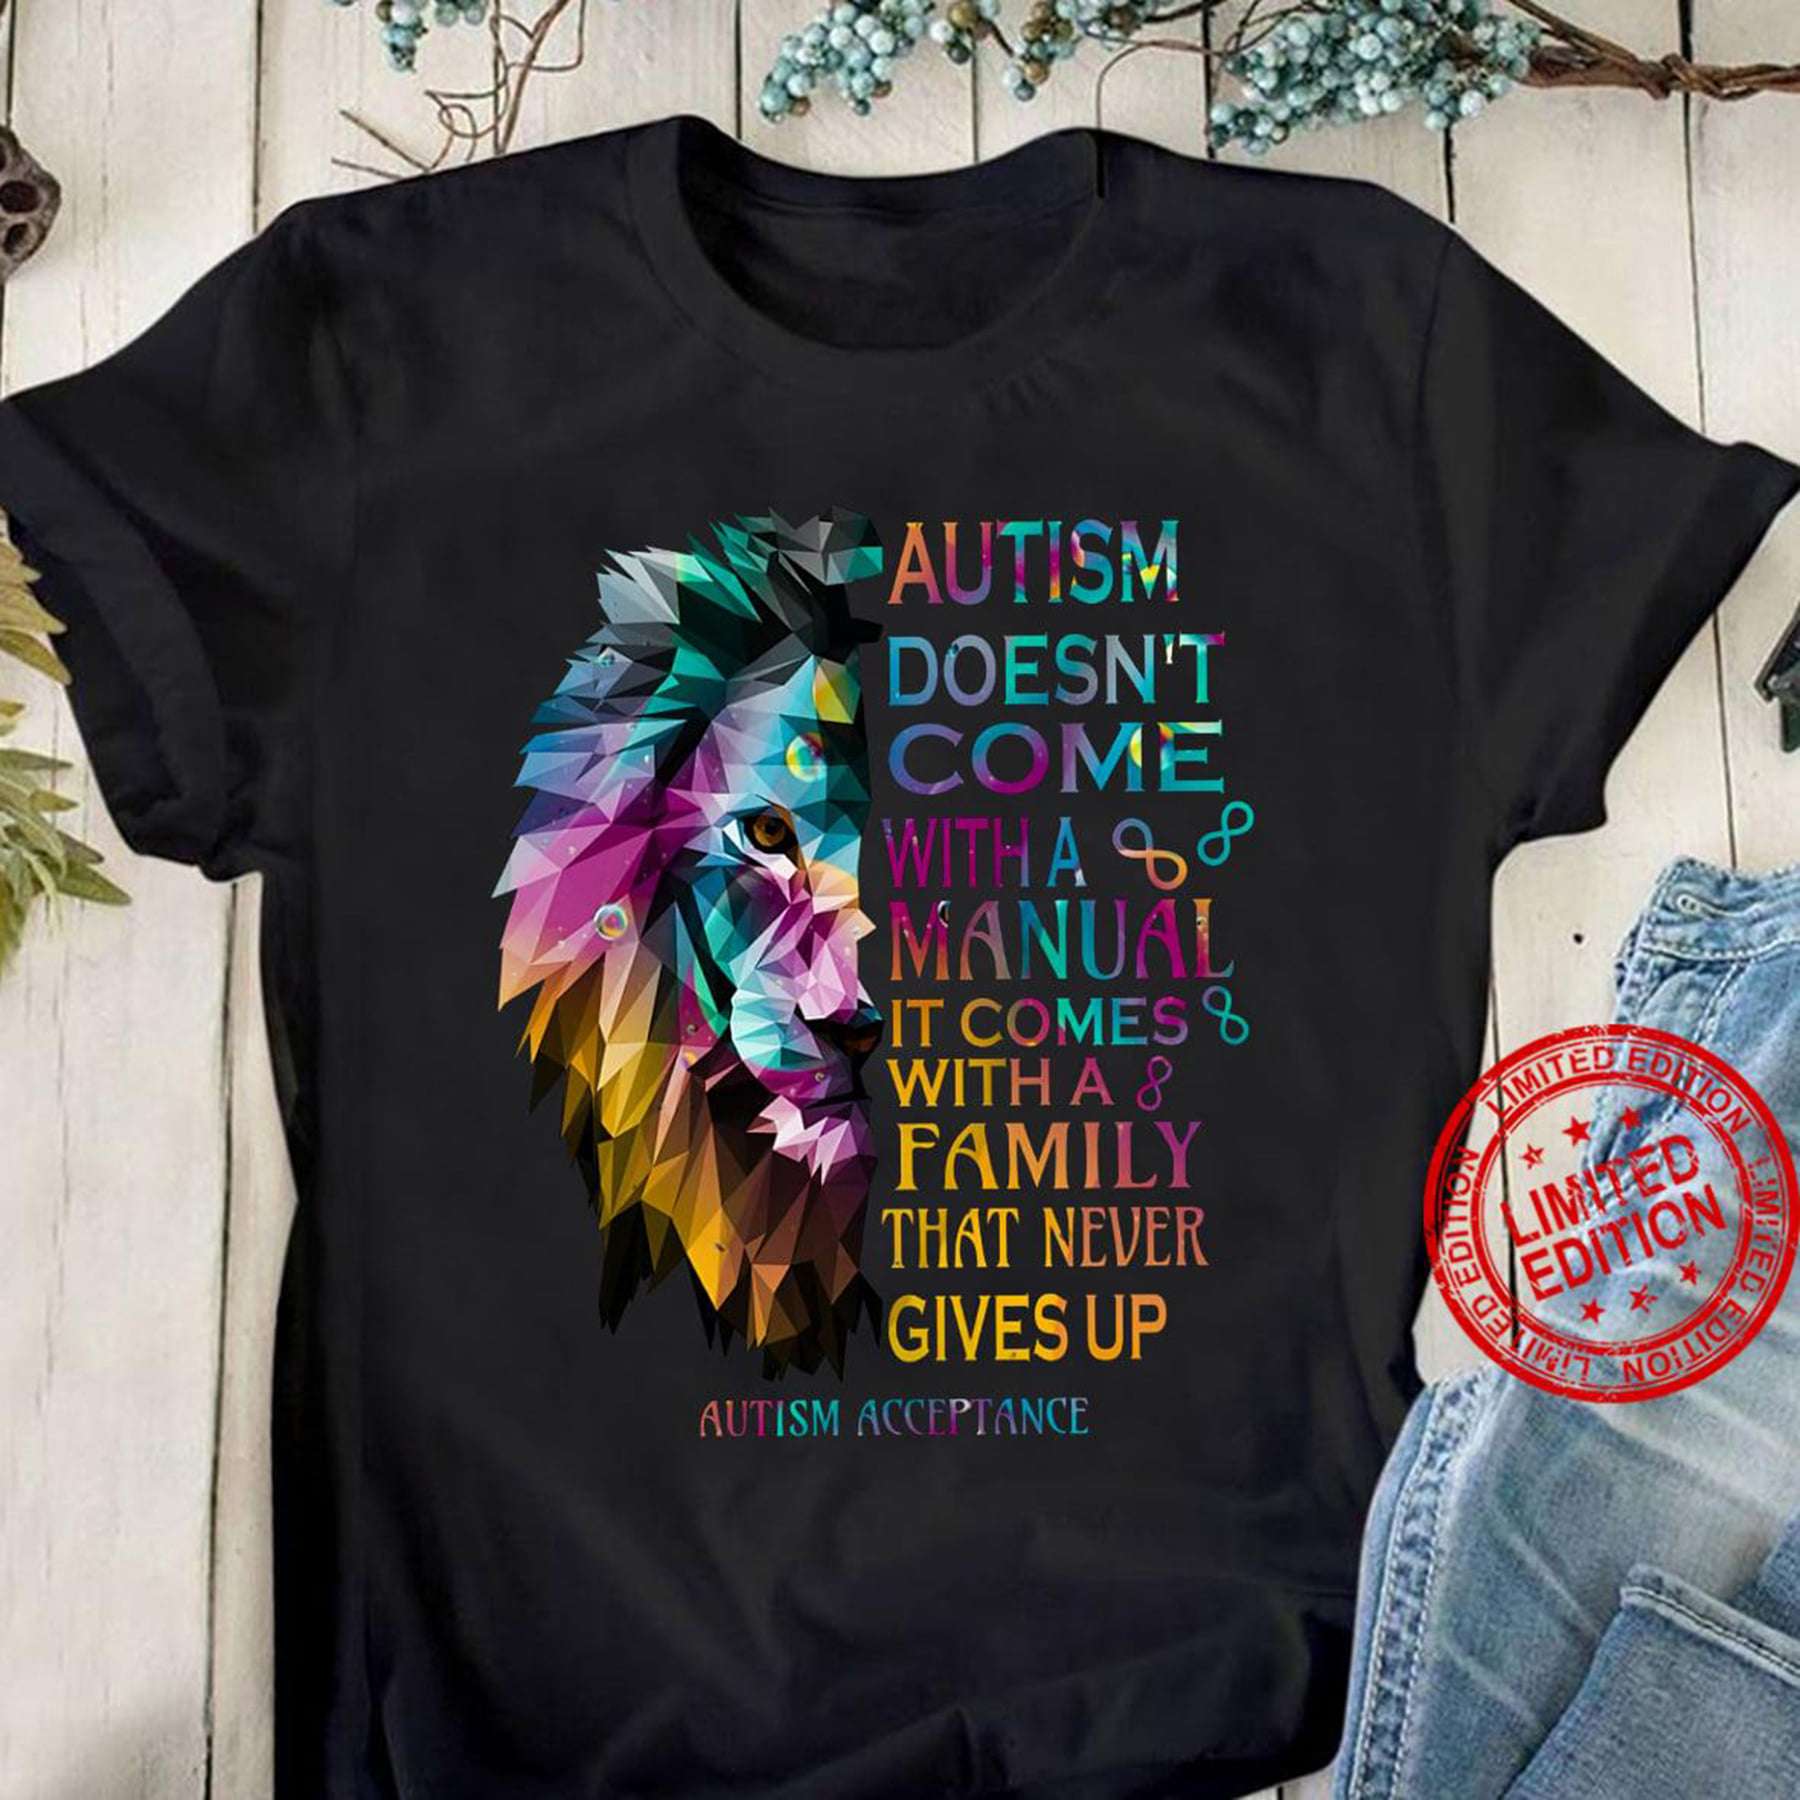 Autism doesn't come with a manual it comes with a family that never gives up - Autism acceptance, autism awareness